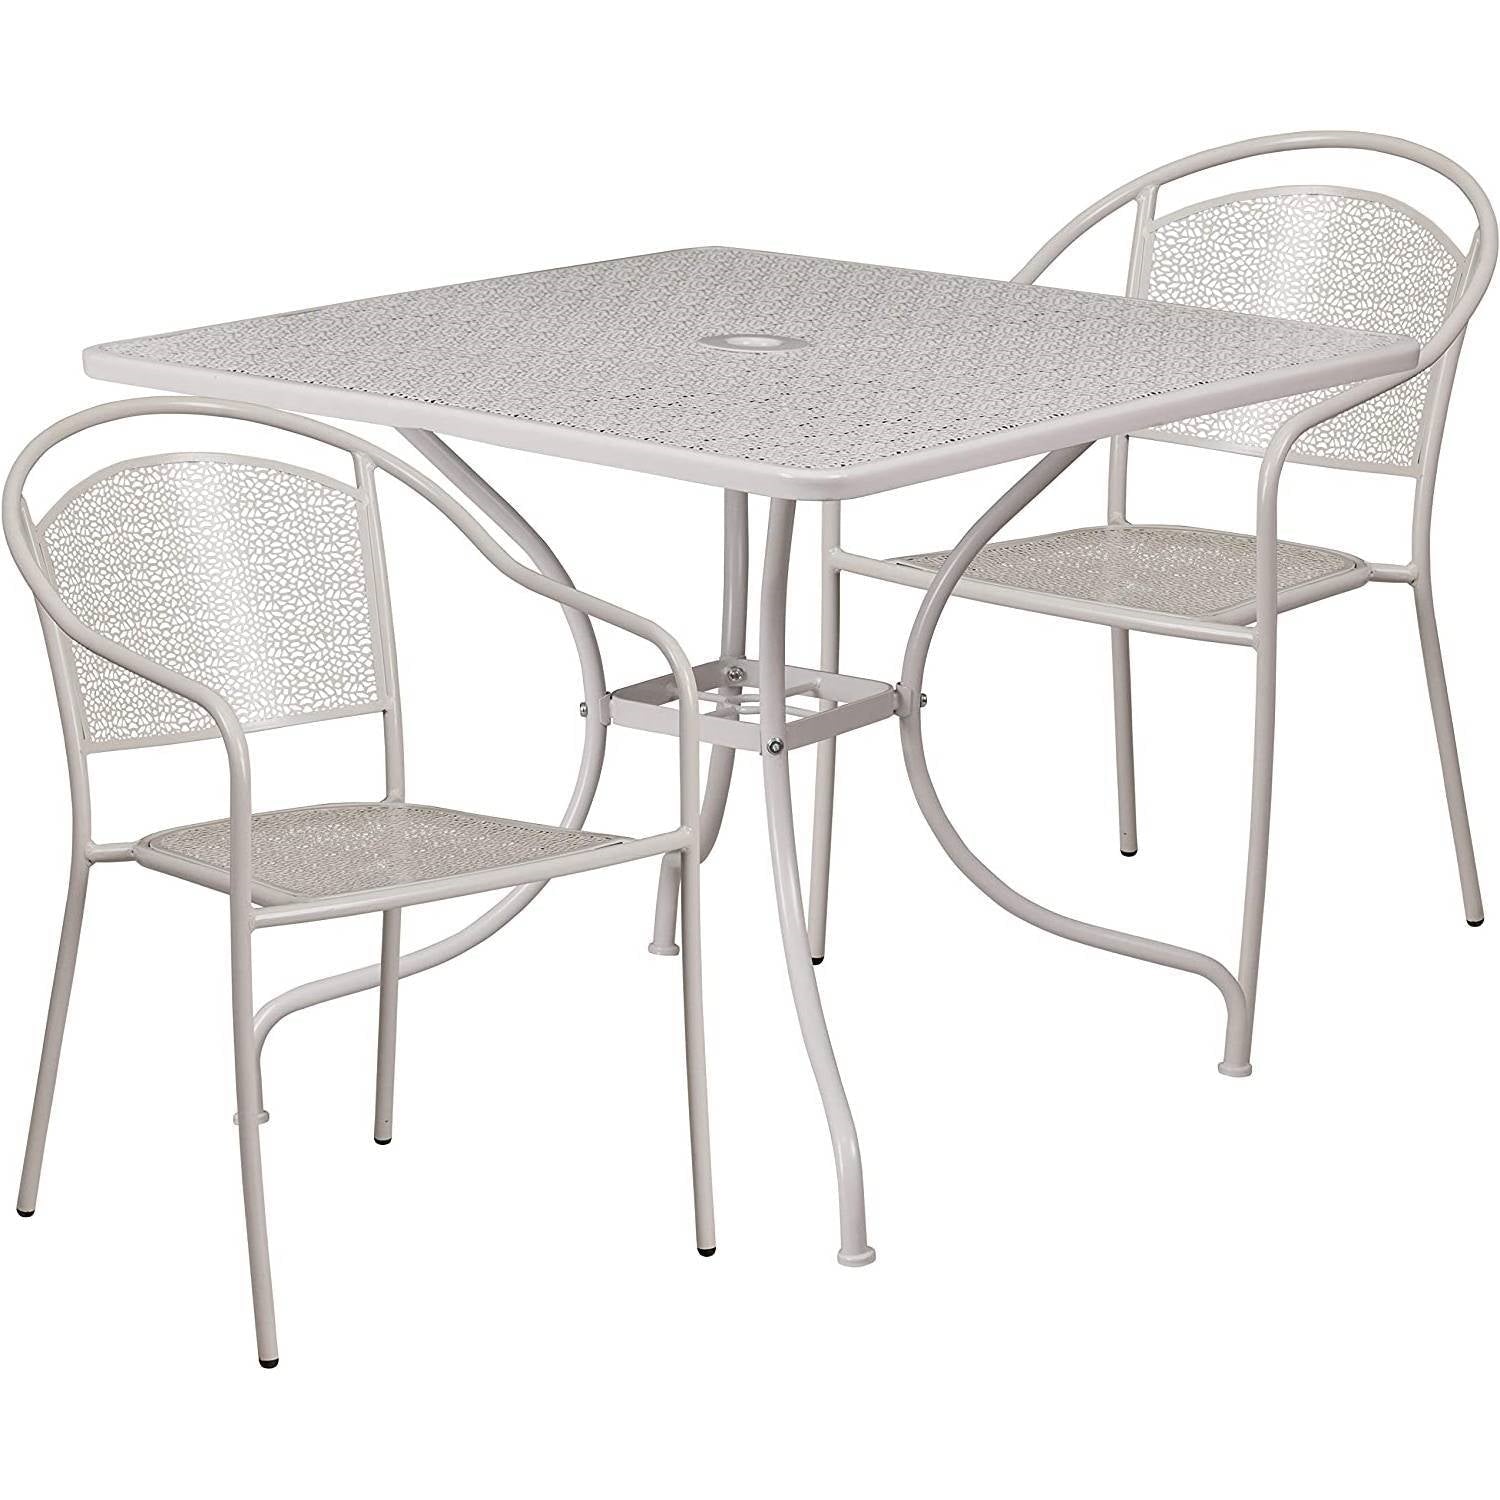 Outdoor > Outdoor Furniture > Patio Furniture Sets - 3-Piece Grey Steel Metal Outdoor Patio Furniture Set With 2 Chairs And 1 Table